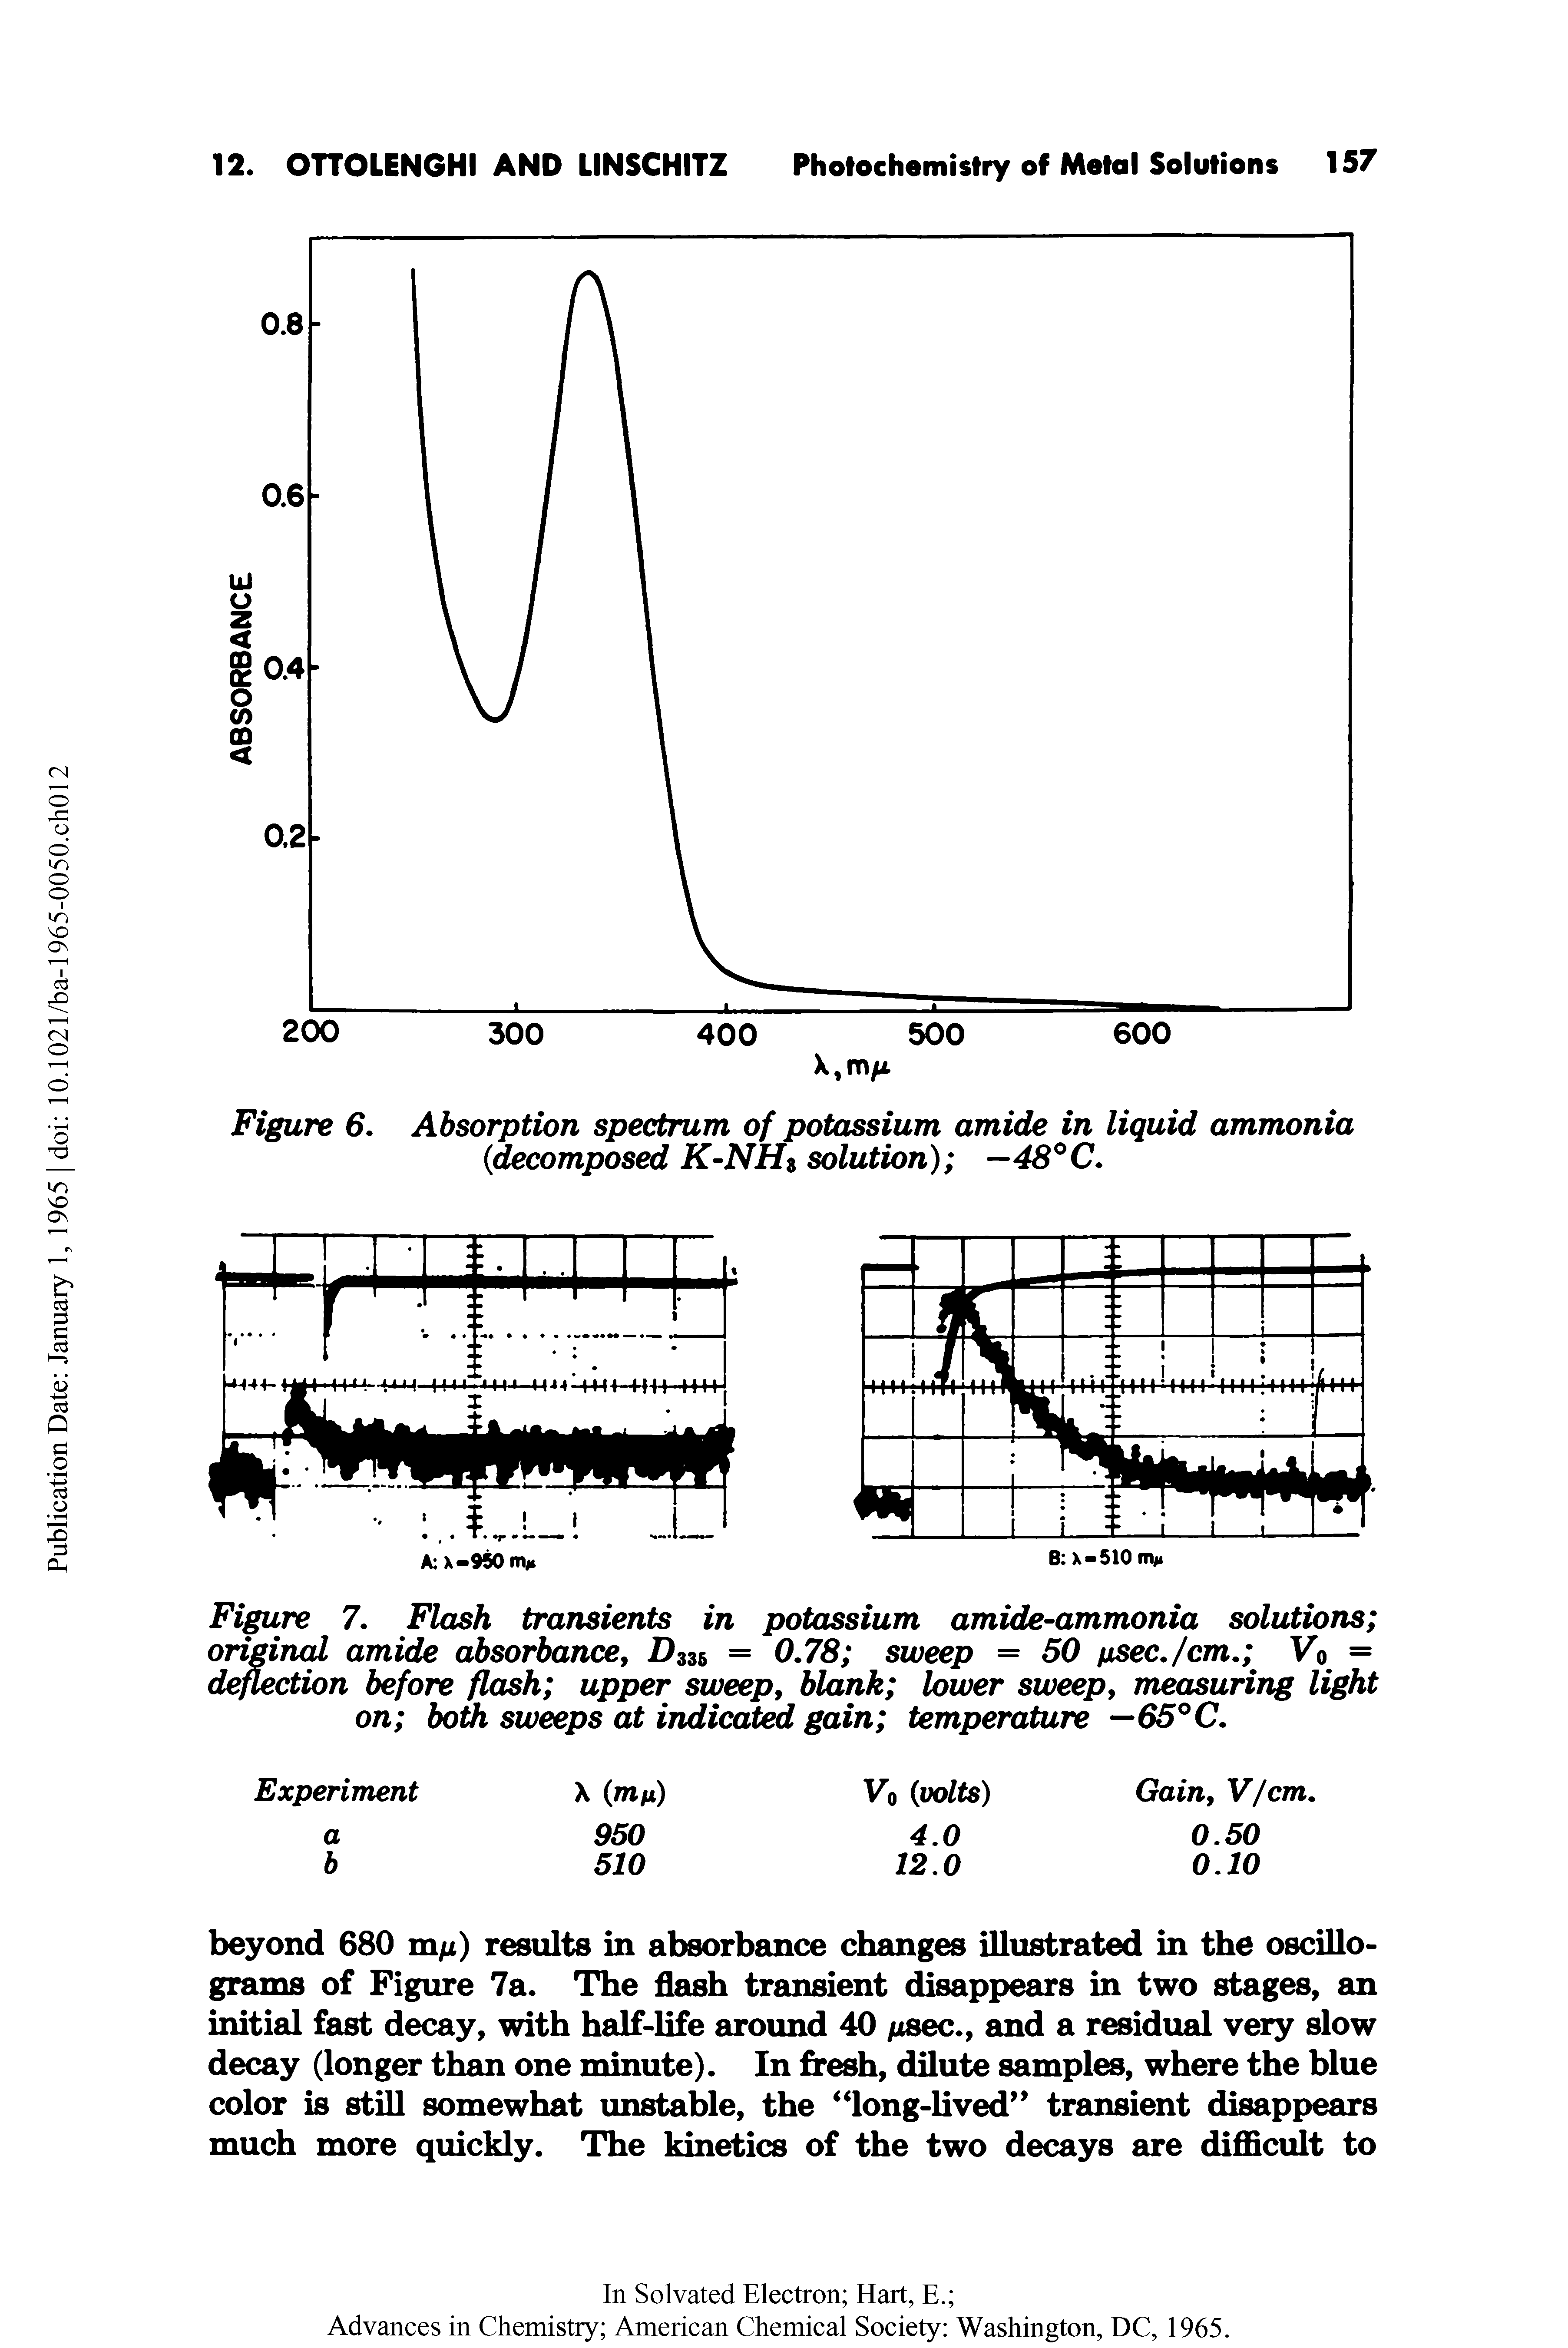 Figure 7. FZasA transients in potassium amide-ammonia solutions original amide absorbance, D335 = 0.78 sweep = 50 nsec./cm. Vo = deflection before flash upper sweep, blank lower sweep9 measuring light on both sweeps at indicated gain temperature —65°C.